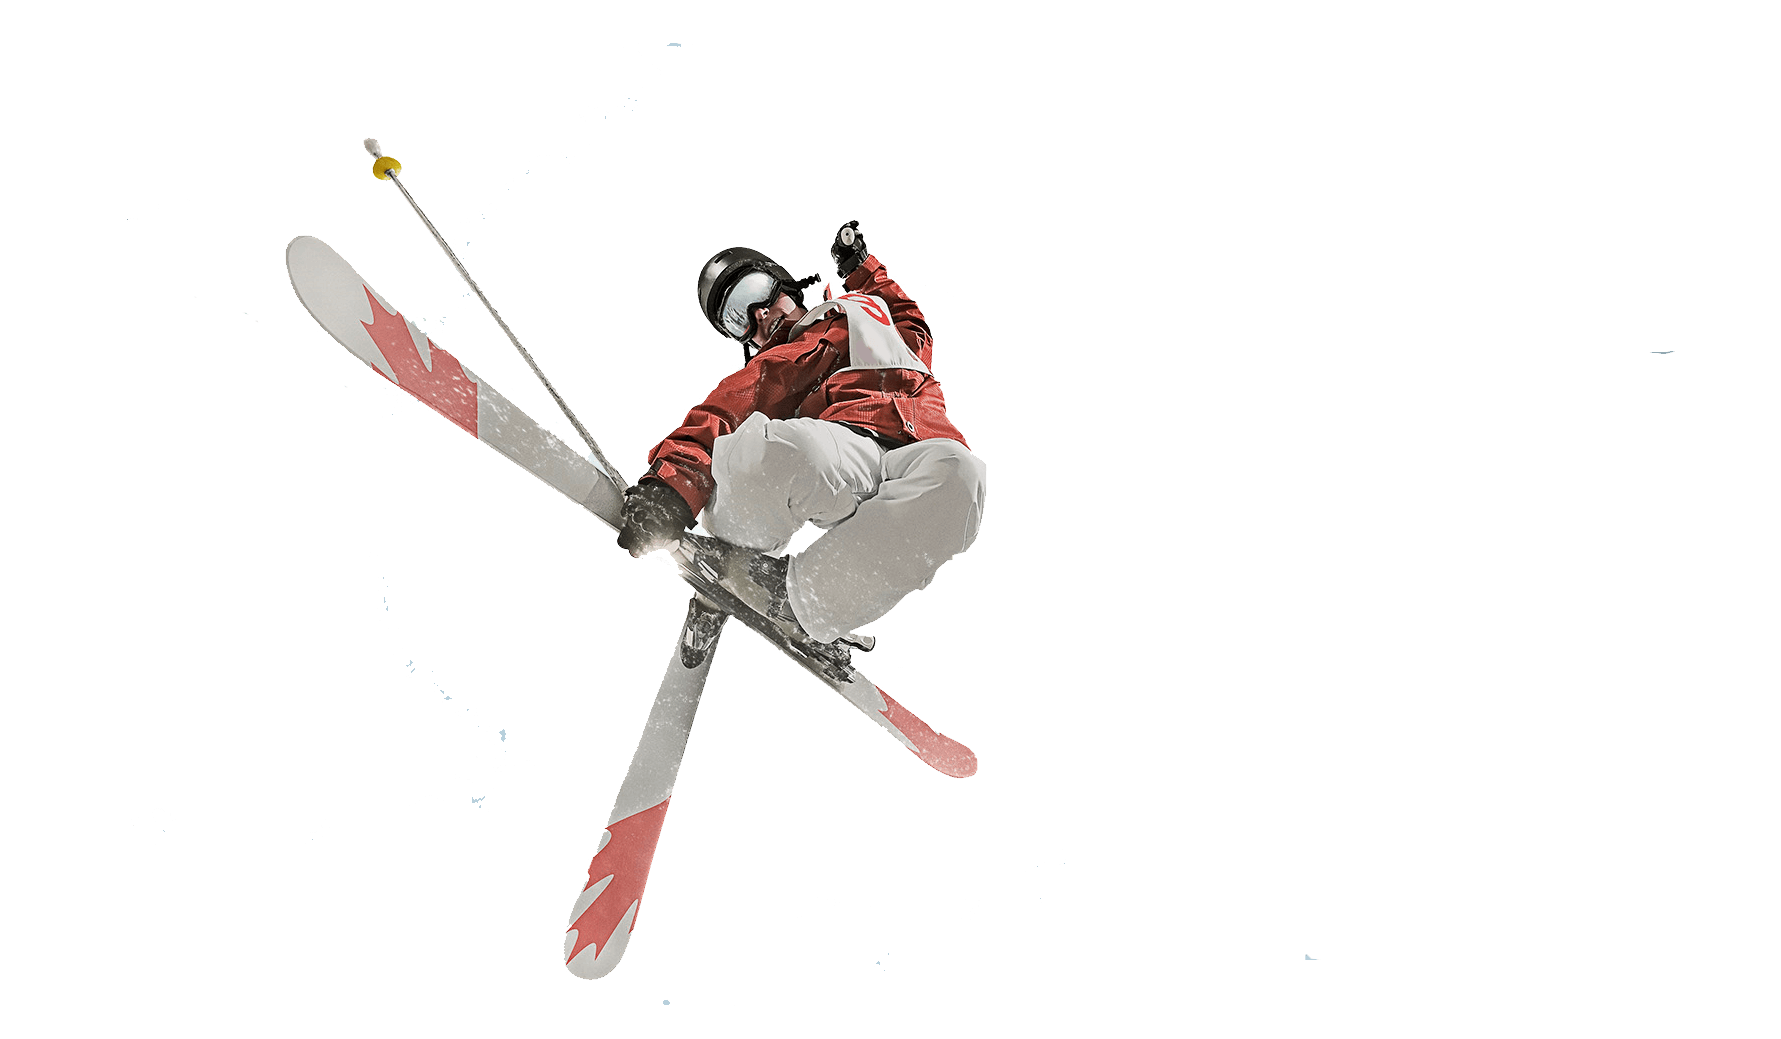 skis clipart freestyle skiing